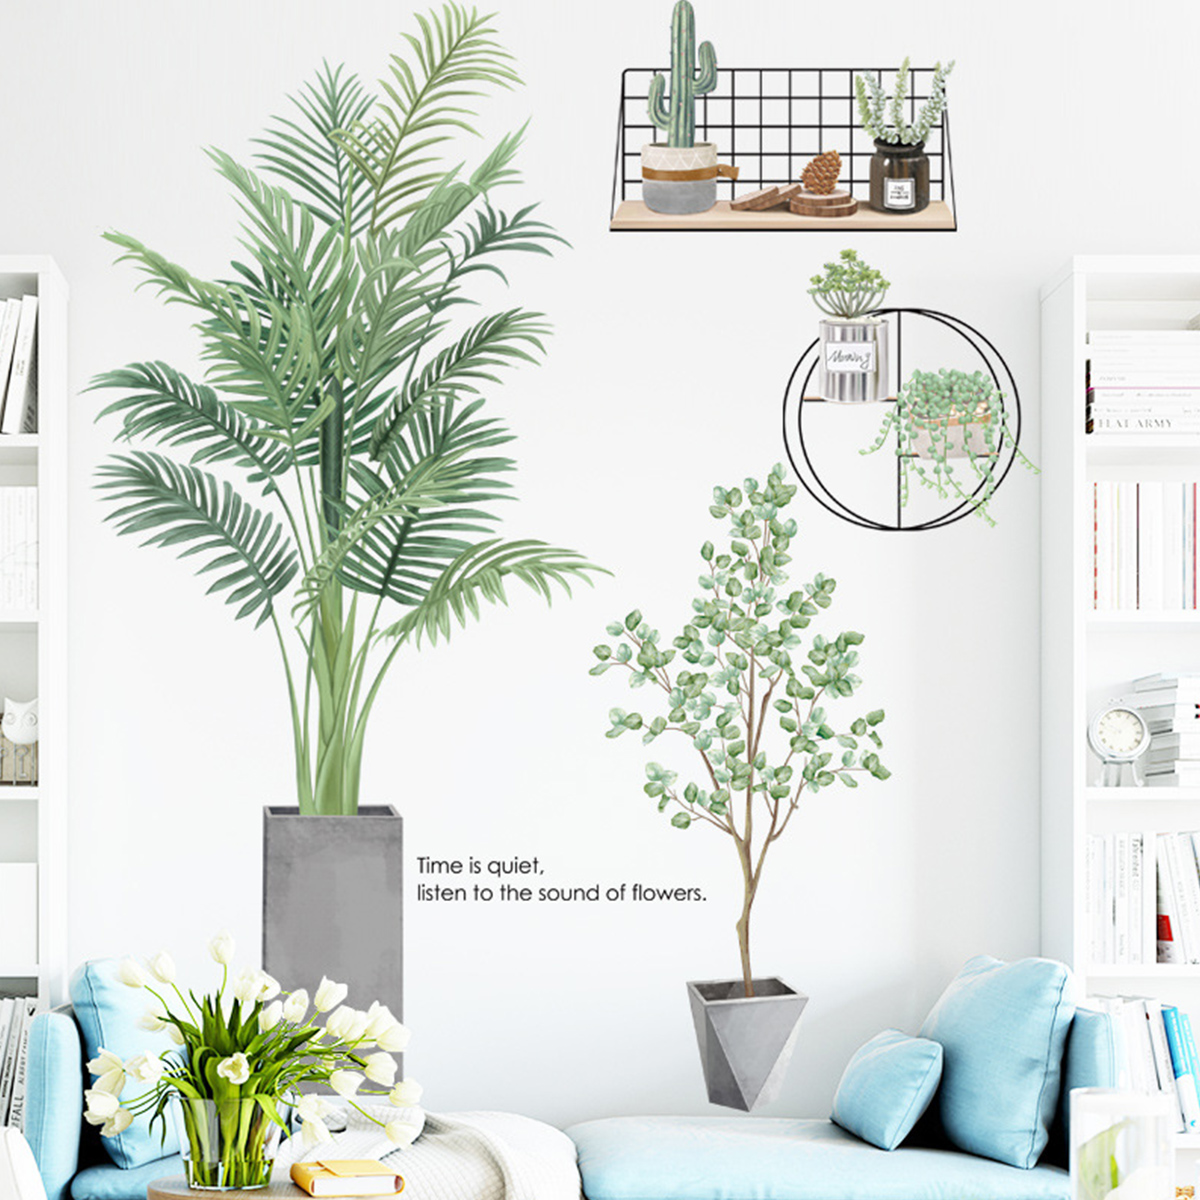 Green-Leaves-Wall-Stickers-Waterproof-Removable-Wall-Decal-Home-Office-Living-Room-Bedroom-Wall-Deco-1774850-7